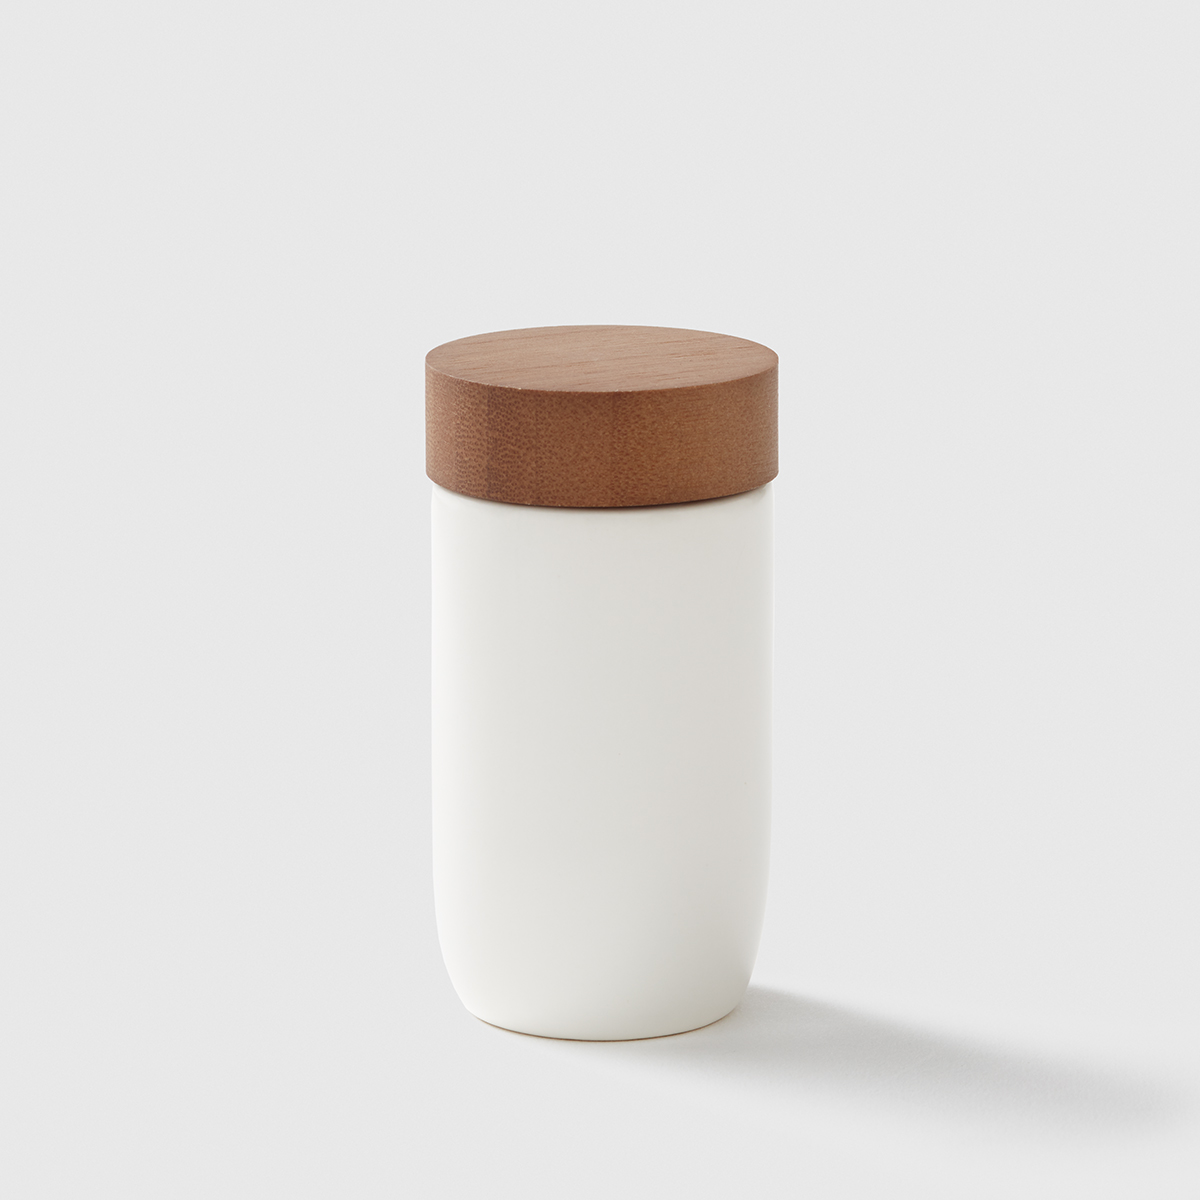 Marie Kondo Spice Jar with Bamboo Lid